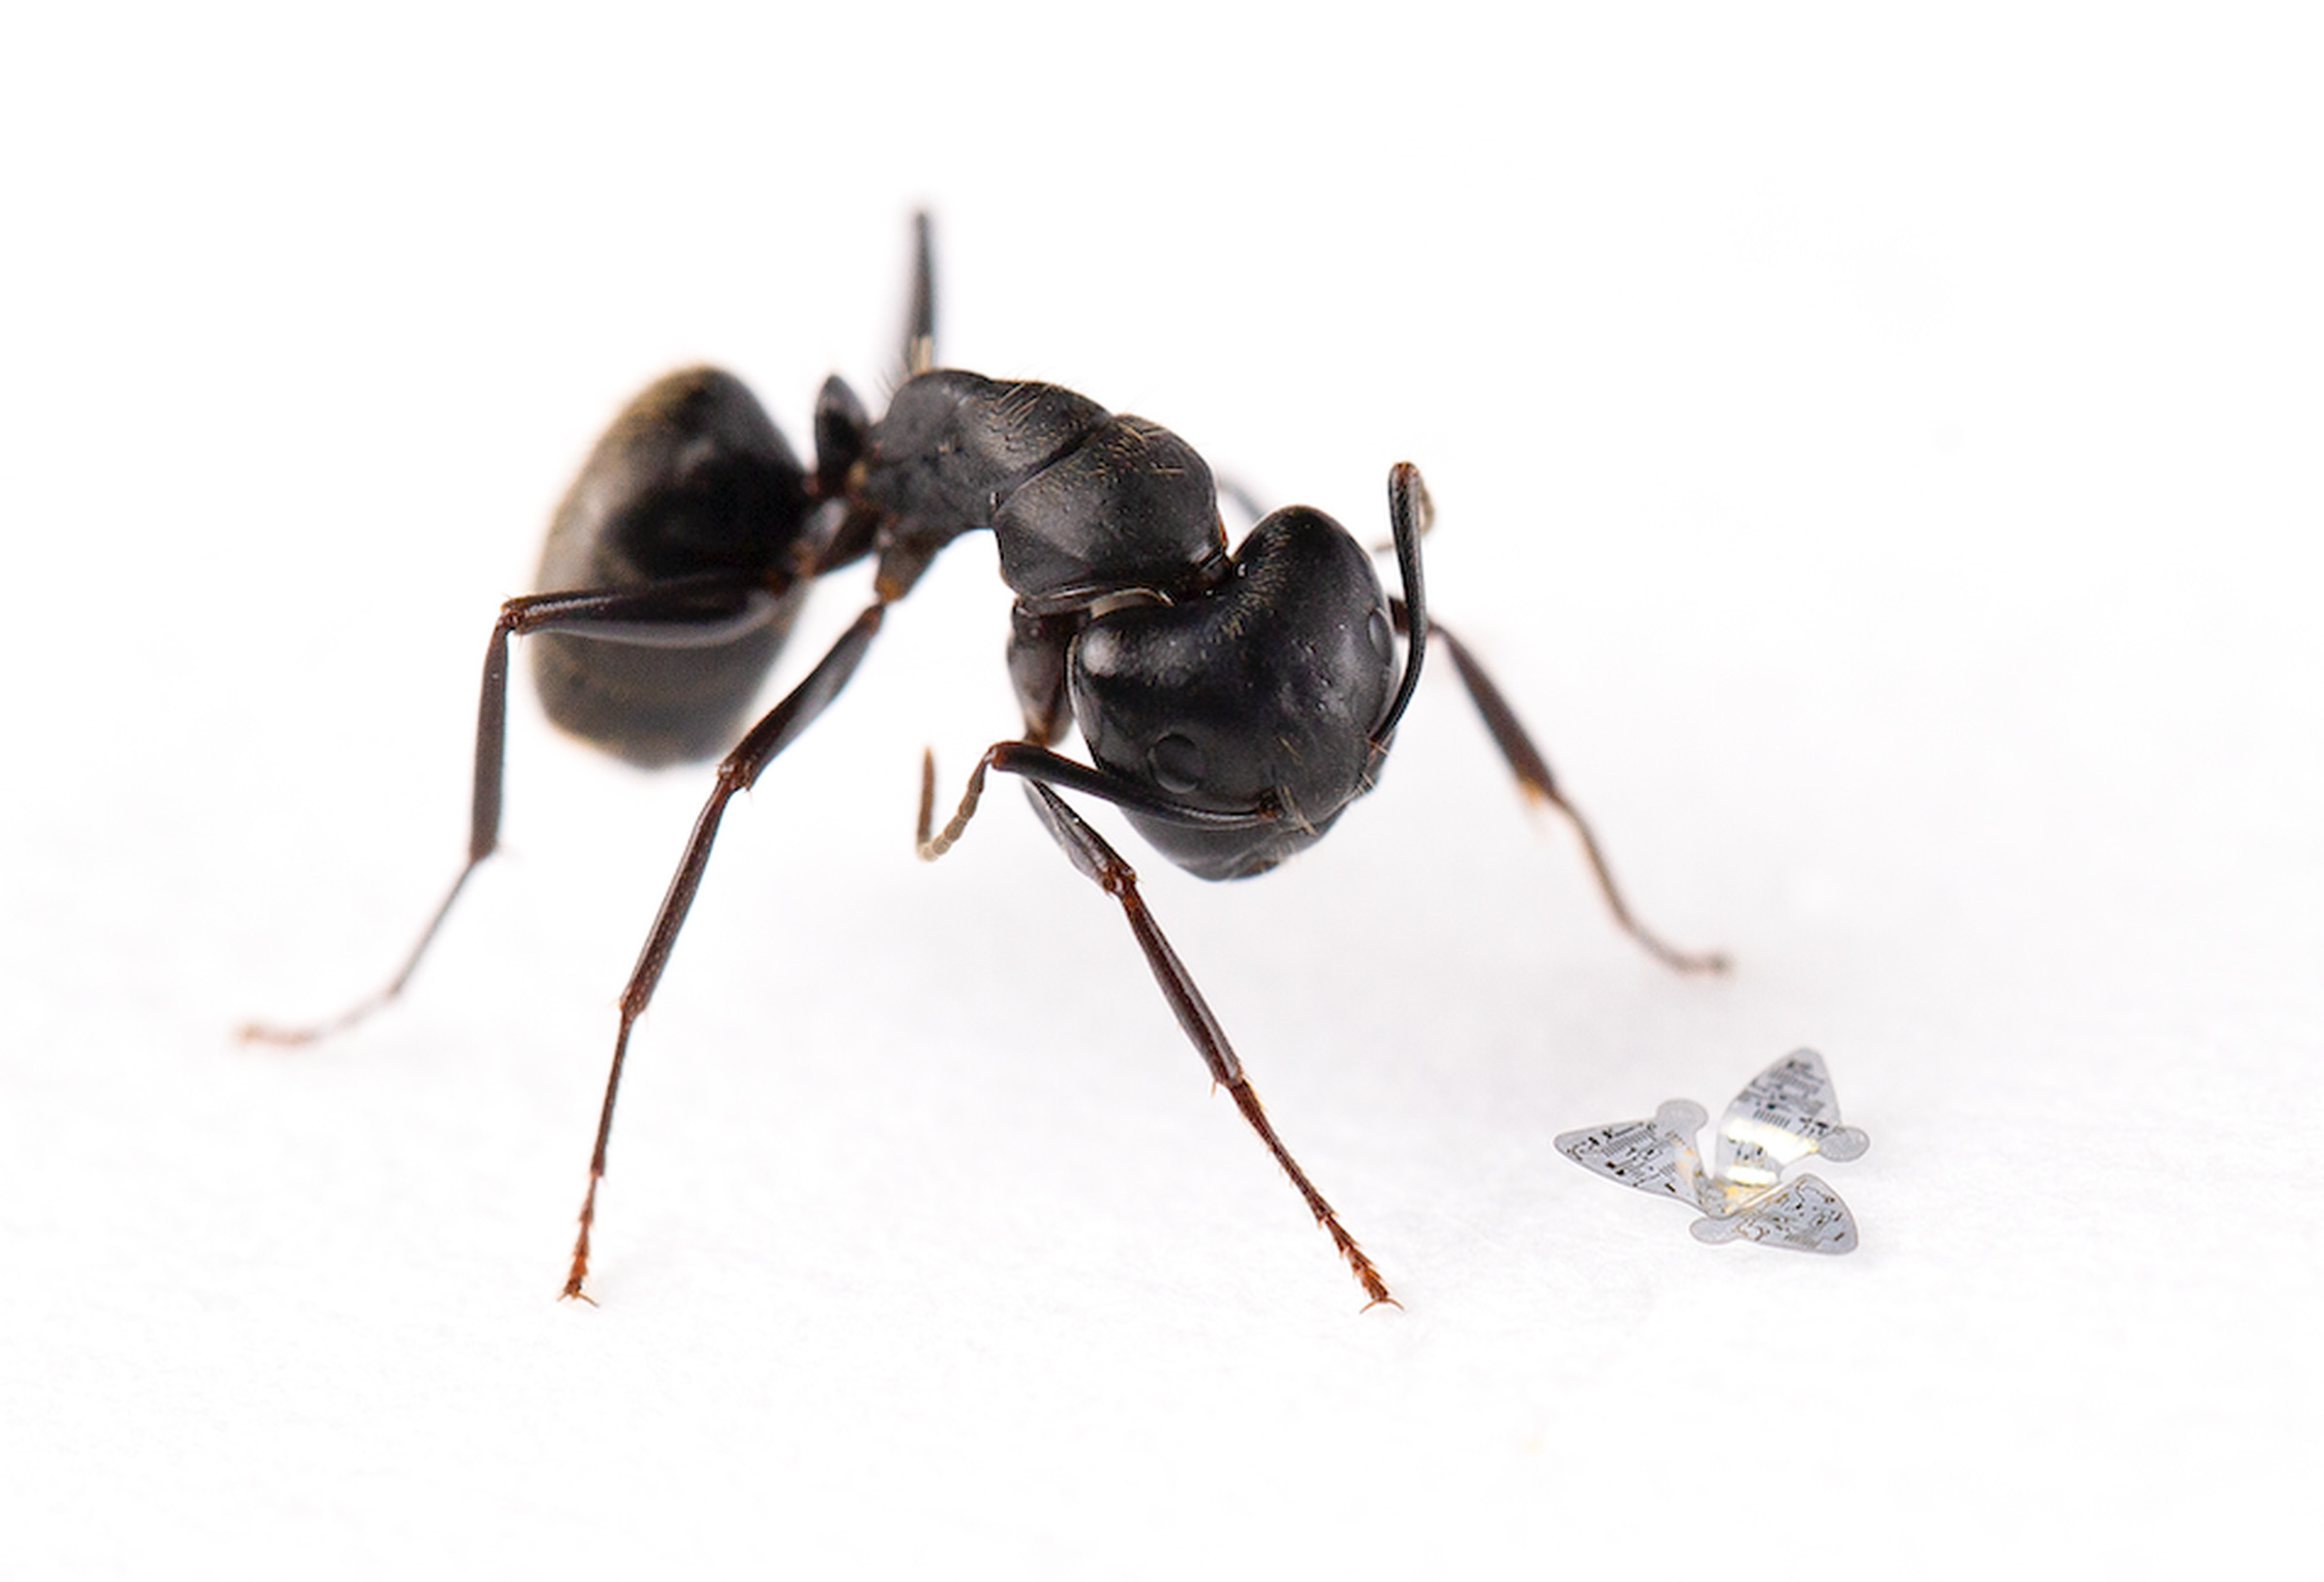 The fliers varied in size, with some, like this one pictured next to a common ant, approximately two millimeters across. 